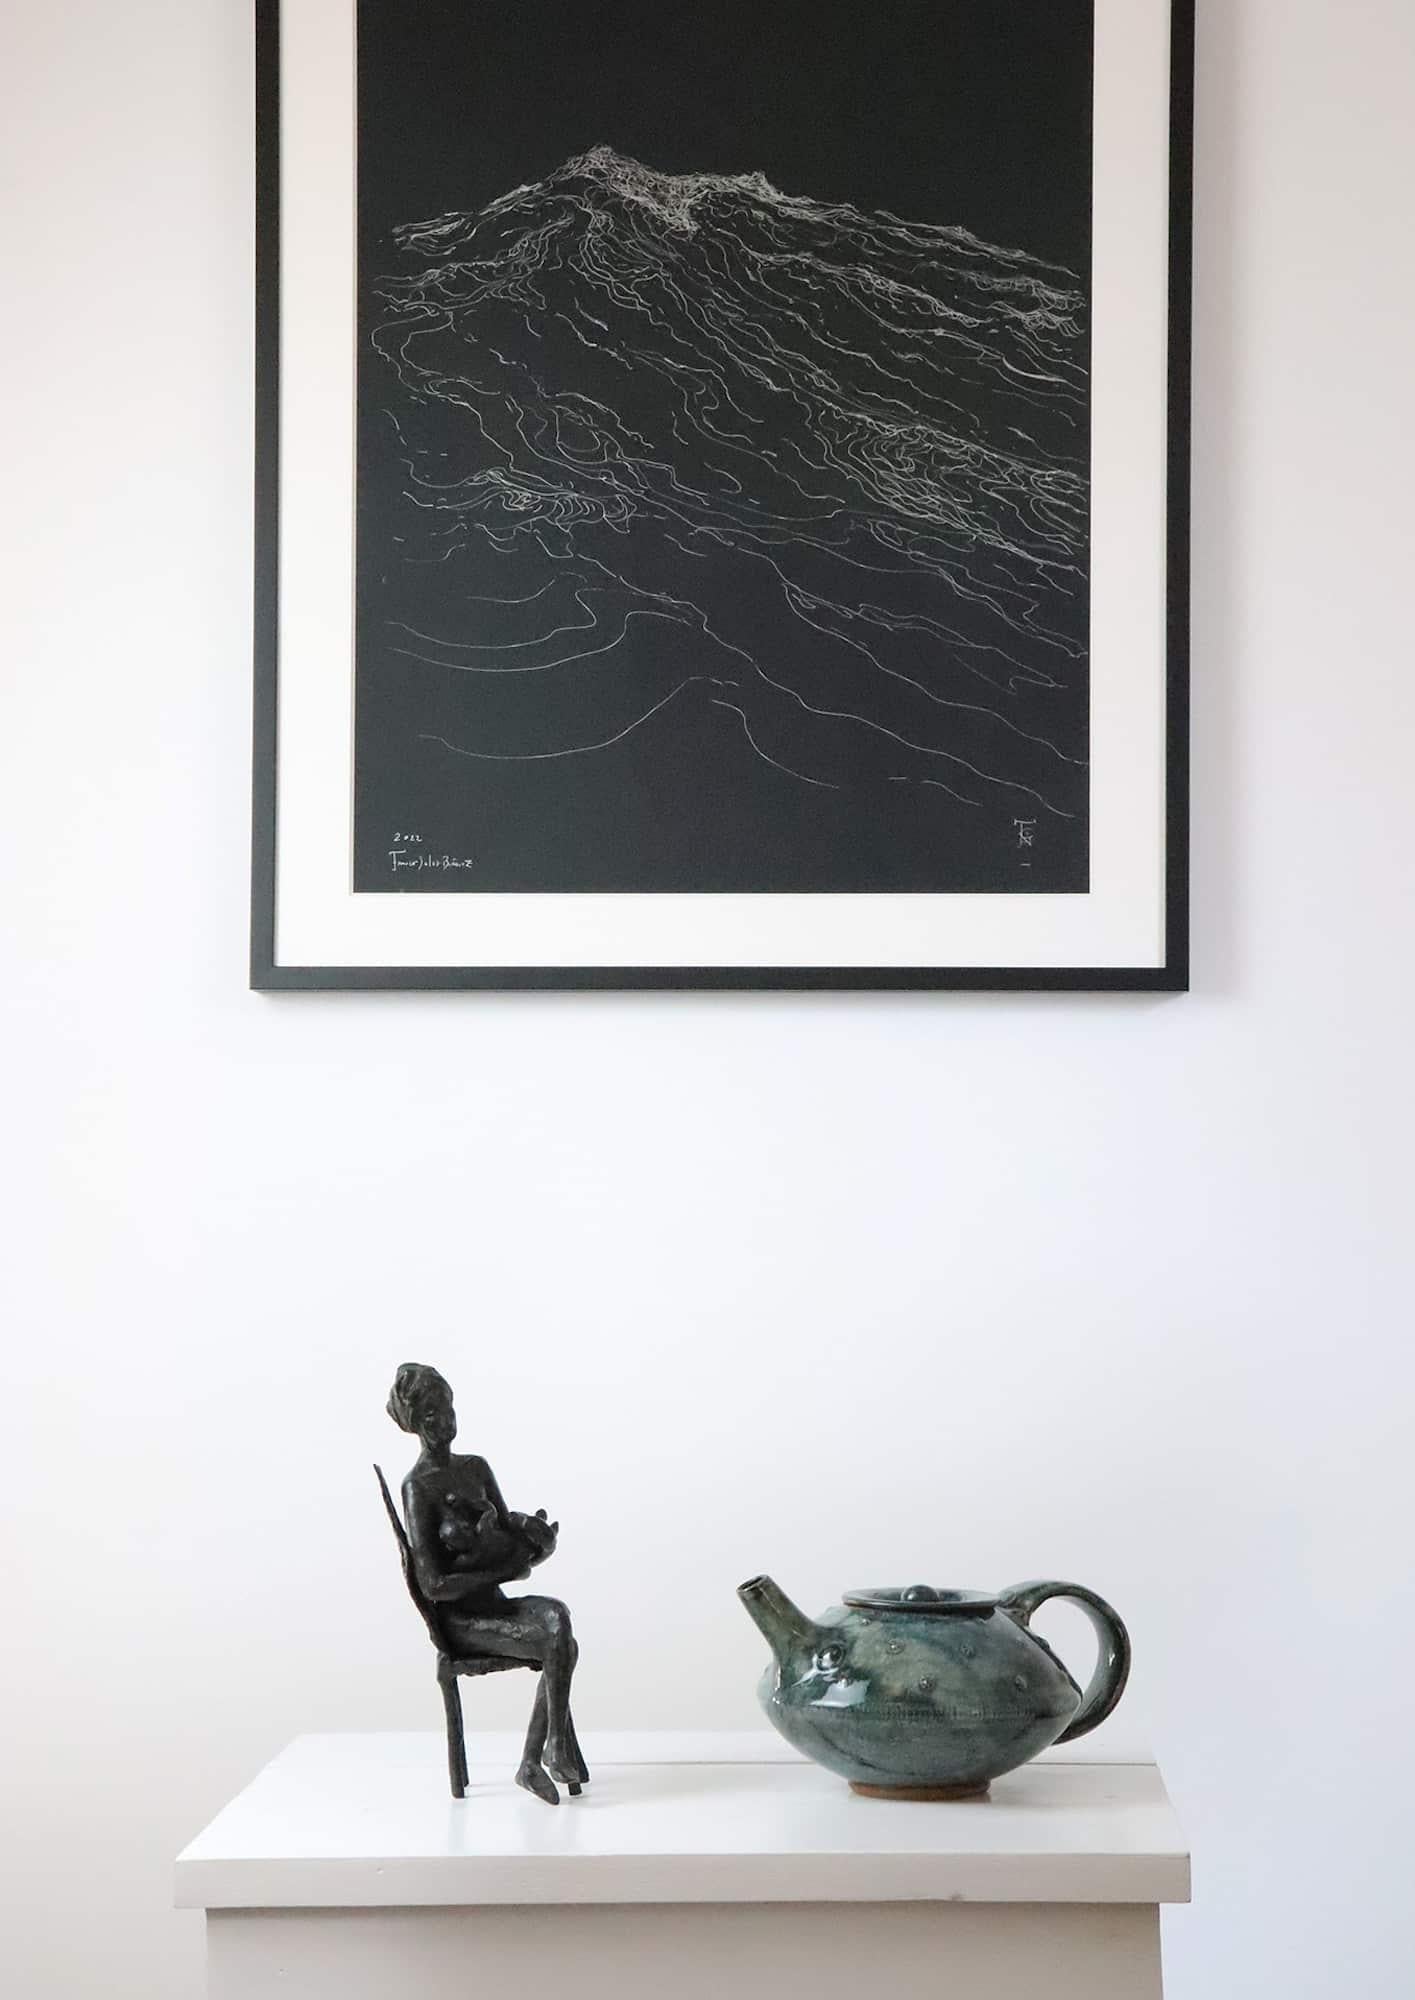 The Early Morning is a bronze sculpture by French contemporary artist Marine de Soos, dimensions are 24 × 17 × 11.5 cm (9.4 × 6.7 × 4.5 in). 
The sculpture is signed and numbered, it is part of a limited edition of 8 editions + 4 artist’s proofs,